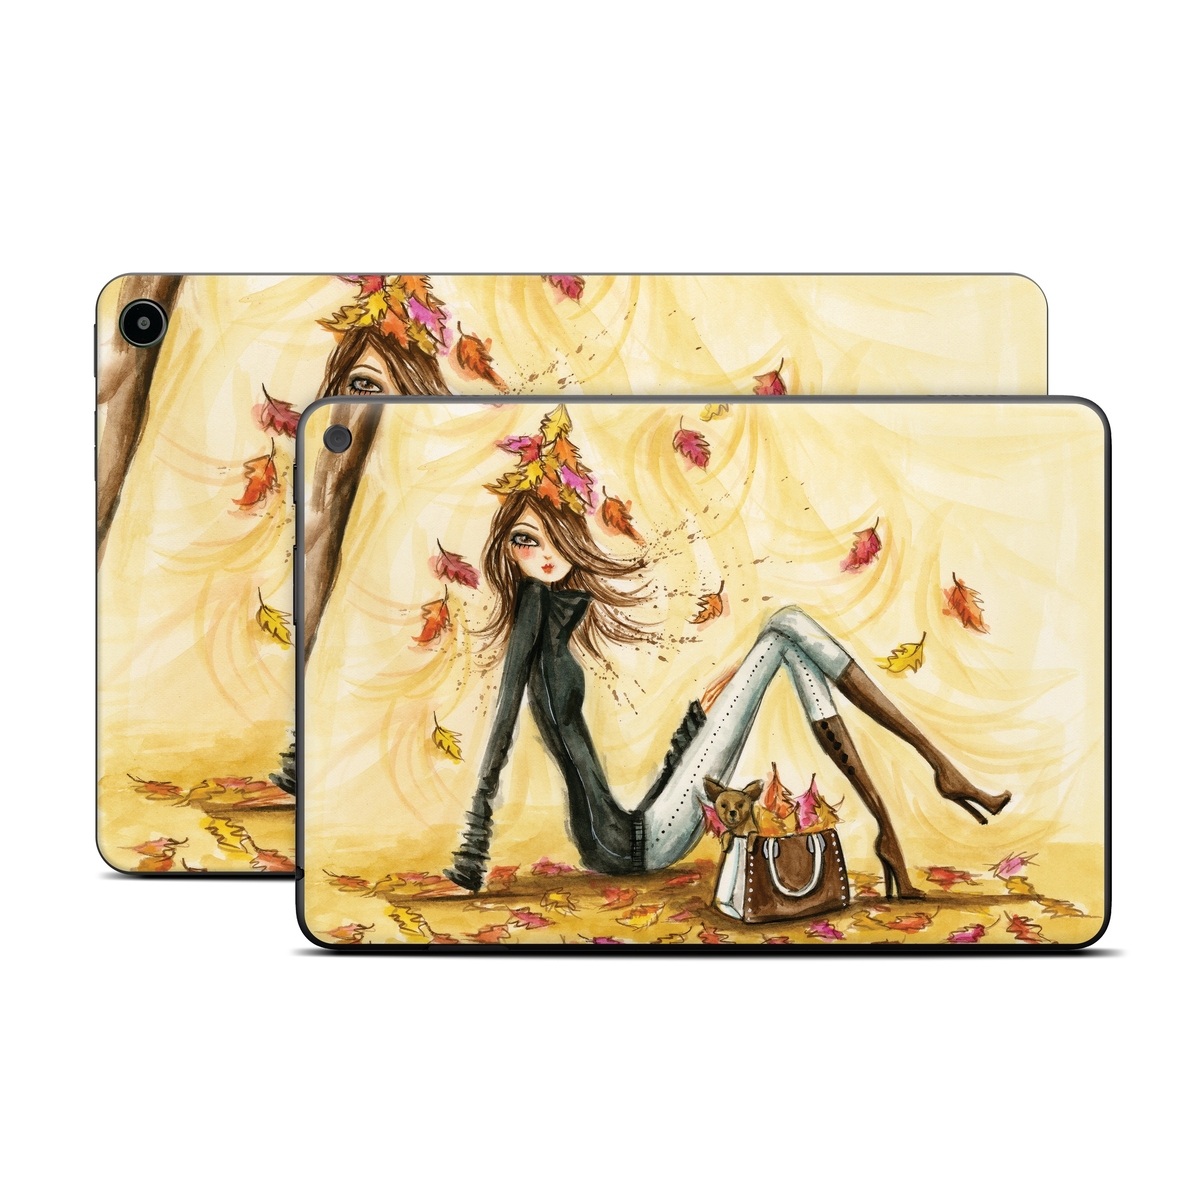 Amazon Fire Tablet Series Skin Skin design of Painting, Watercolor paint, Tree, Art, Illustration, Plant, Modern art, Visual arts, Still life, Fictional character, with yellow, red, brown, orange, black, white colors